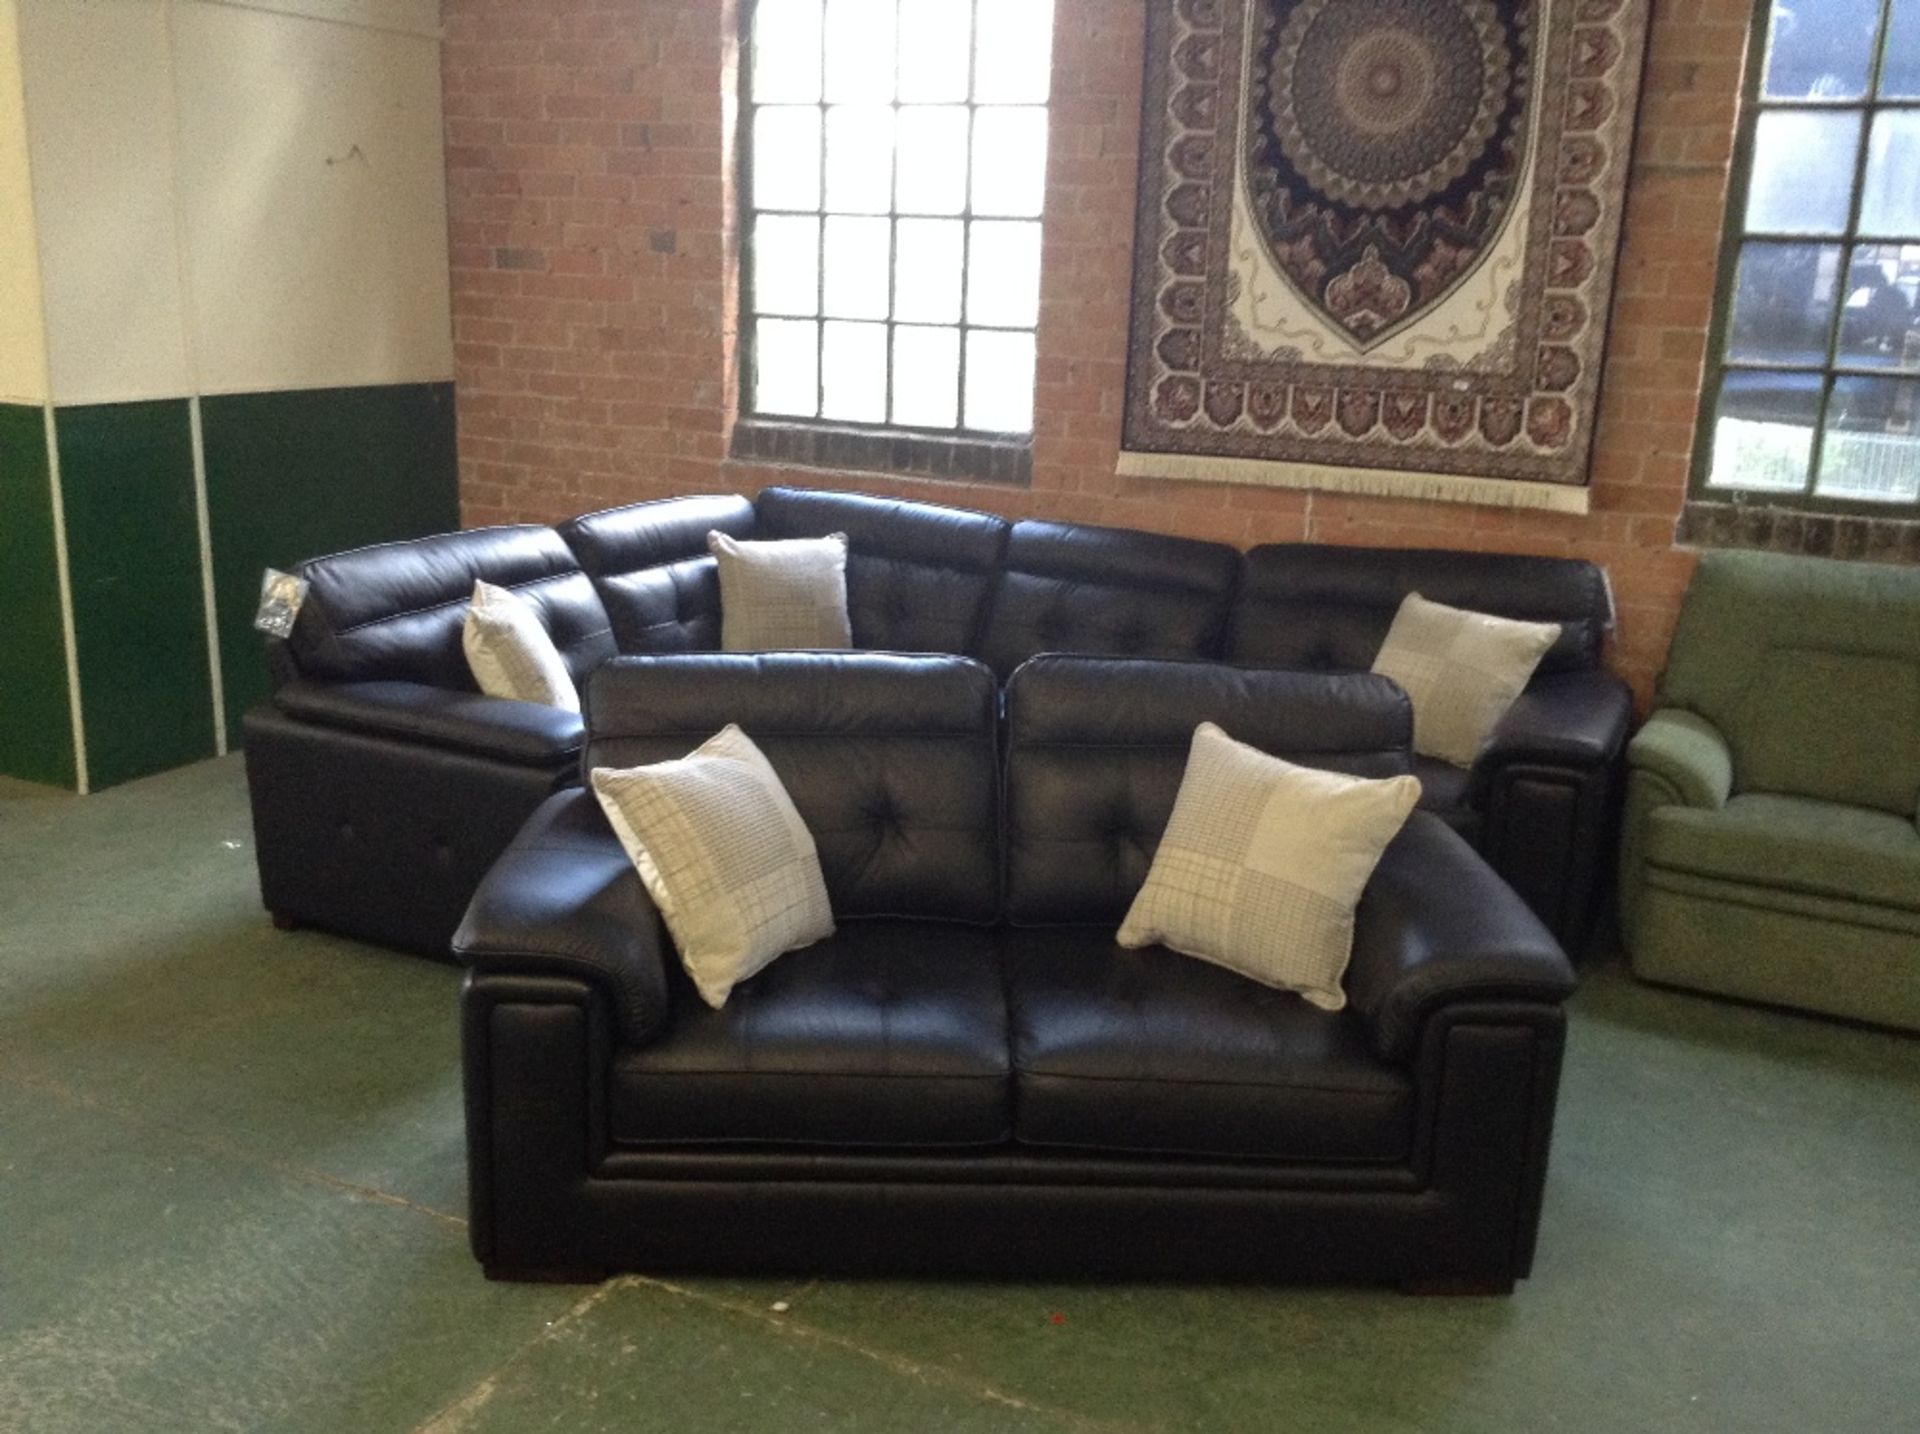 BLACK LEATHER 4 PART CORNER GROUP AND 2 SEATER SOF